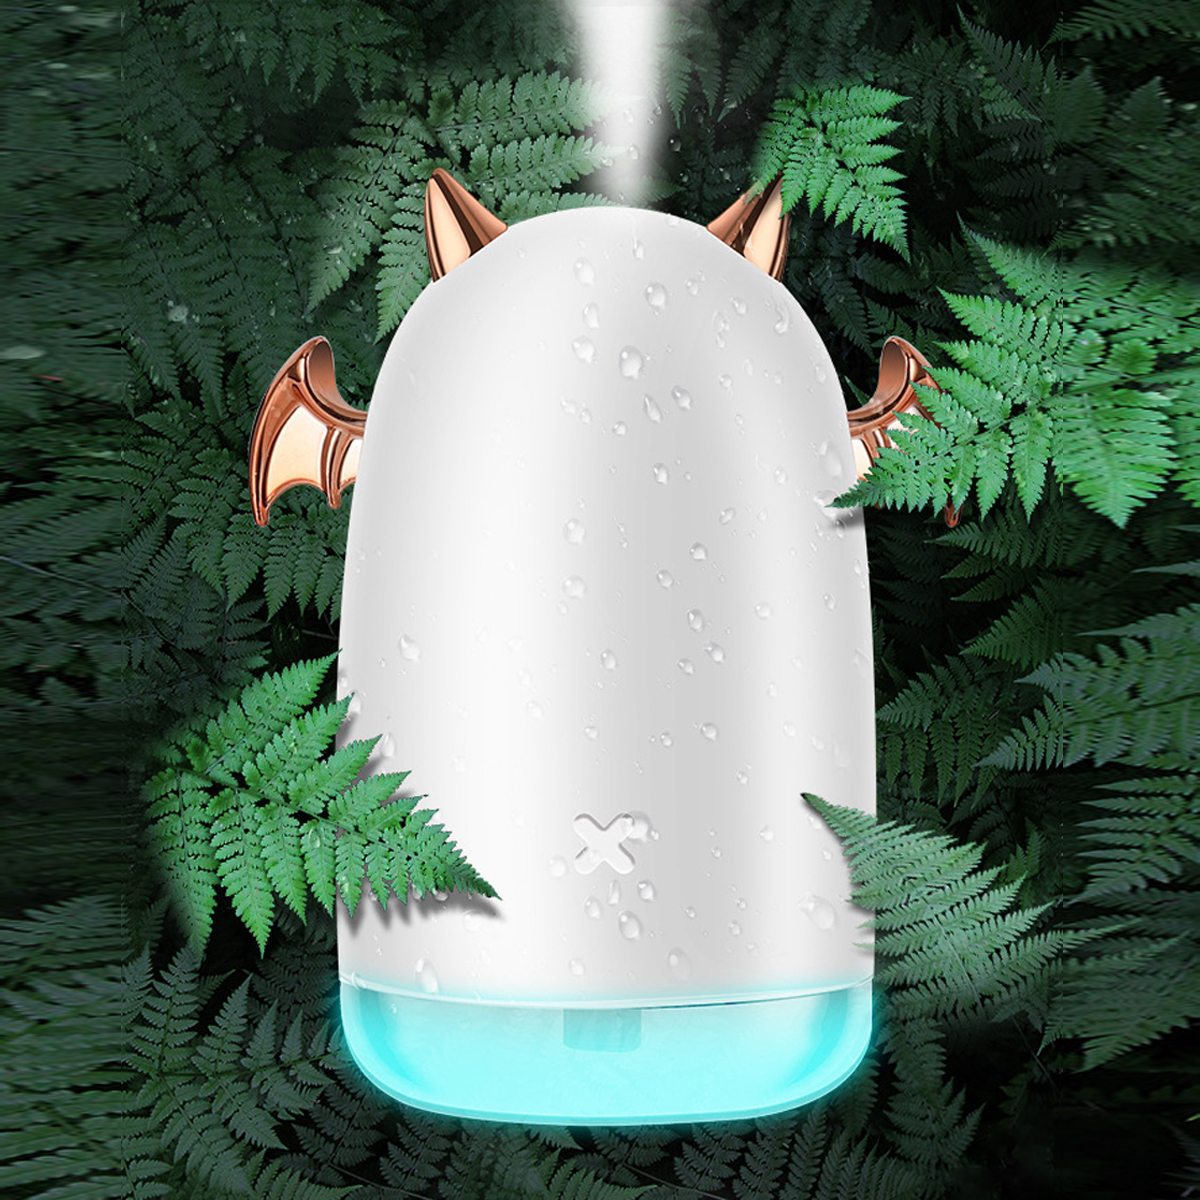 7-LED-Humidifier-USB-Purifier-Mist-Aroma-Essential-Oil-Diffuser-Halloween-Gift-1651094-3